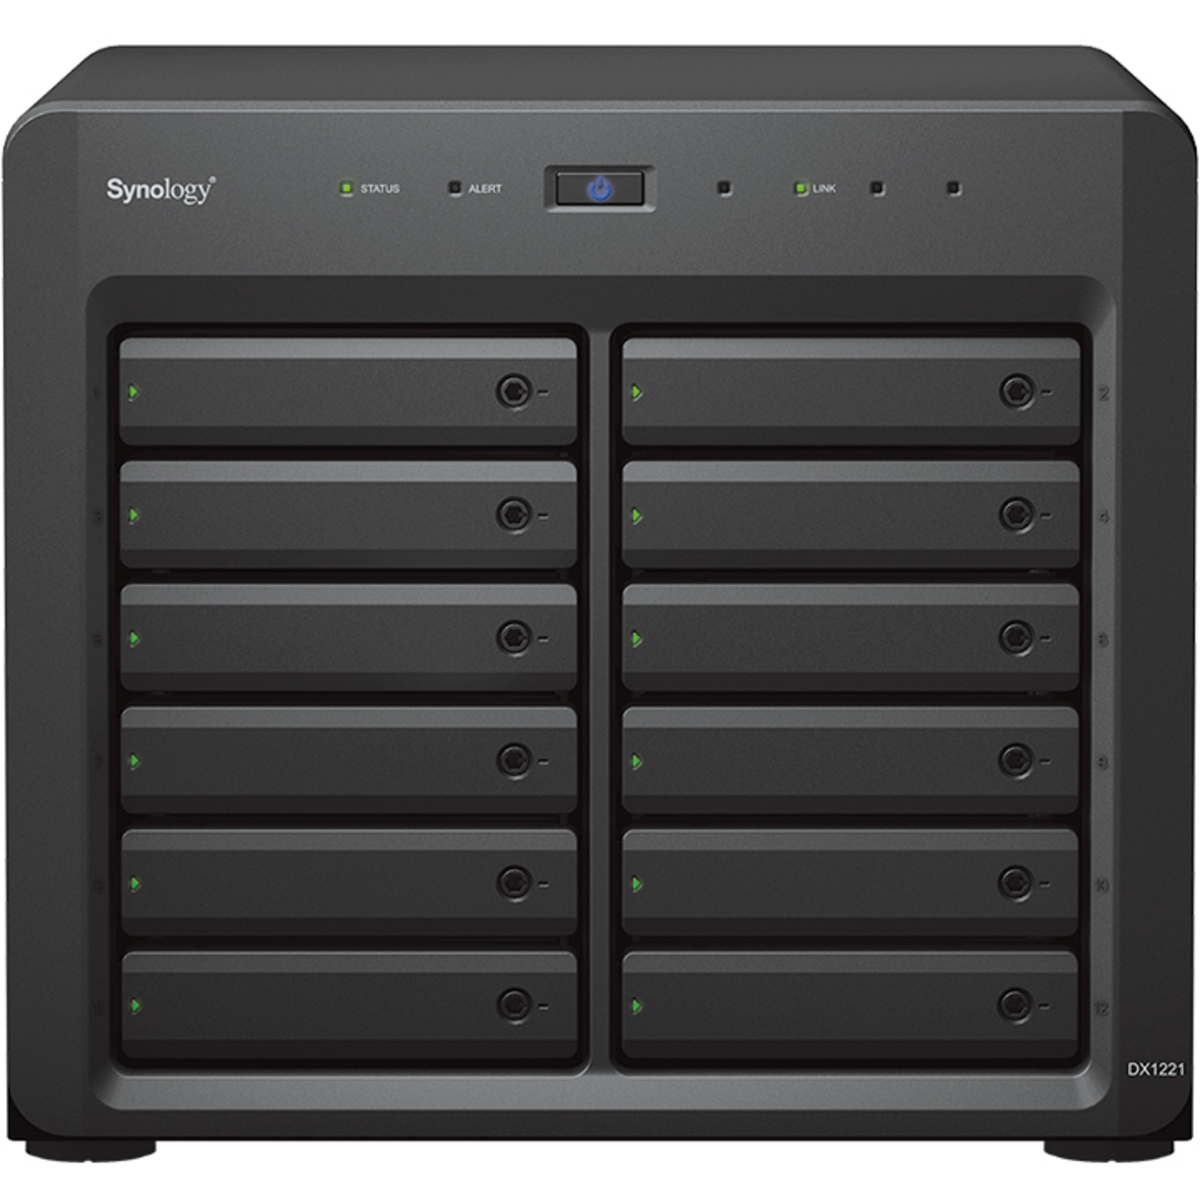 Synology DX1222 External Expansion Drive Desktop 12-Bay Multimedia / Power User / Business Expansion Enclosure Burn-In Tested Configurations DX1222 External Expansion Drive